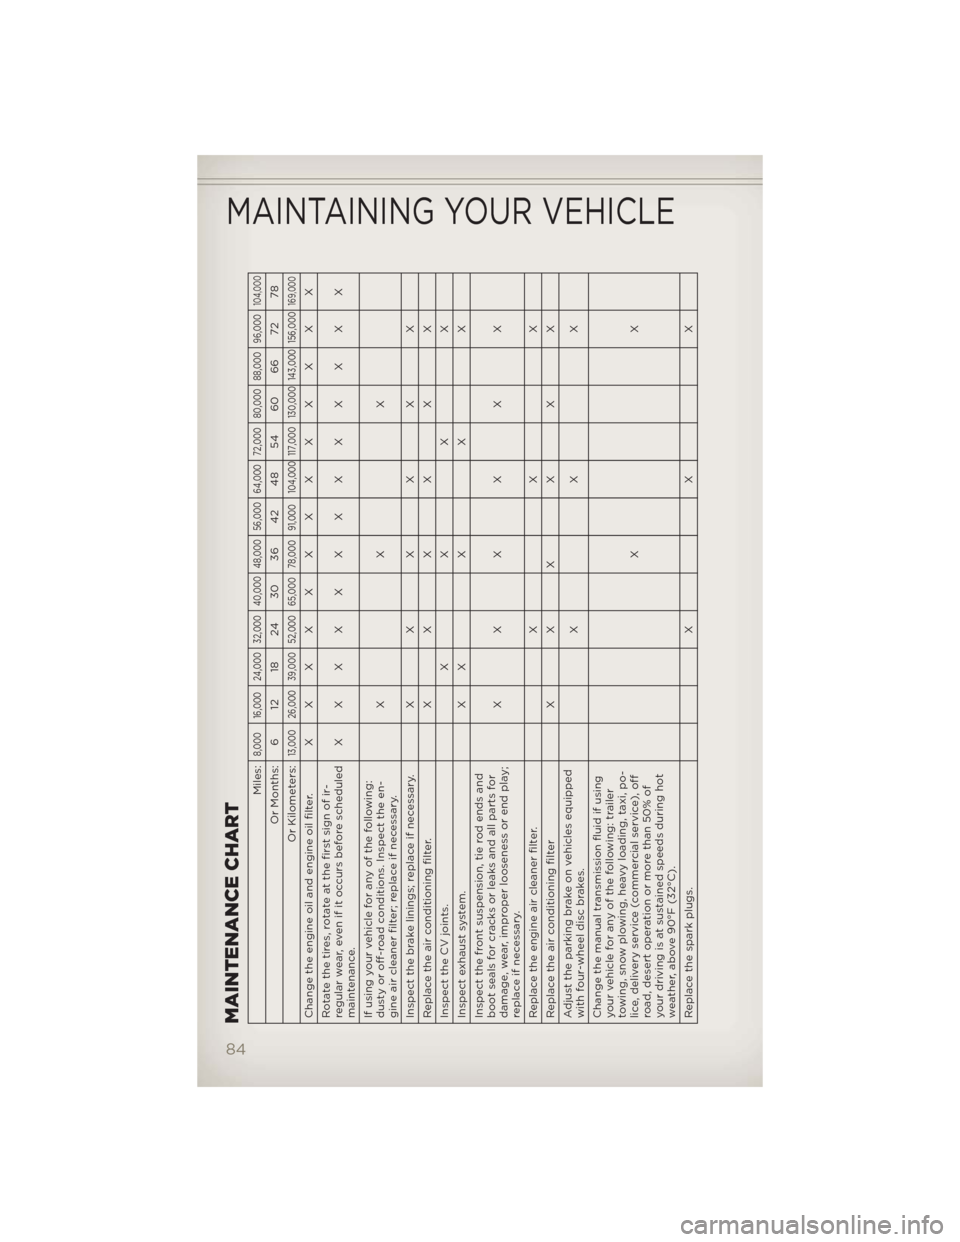 JEEP COMPASS 2012 1.G User Guide MAINTENANCE CHART
Miles:
8,000 16,000 24,000 32,000 40,000 48,000 56,000 64,000 72,000 80,000 88,000 96,000
104,000
Or Months: 6 12 18 24 30 36 42 48 54 60 66 72 78
Or Kilometers:
13,000 26,000 39,000